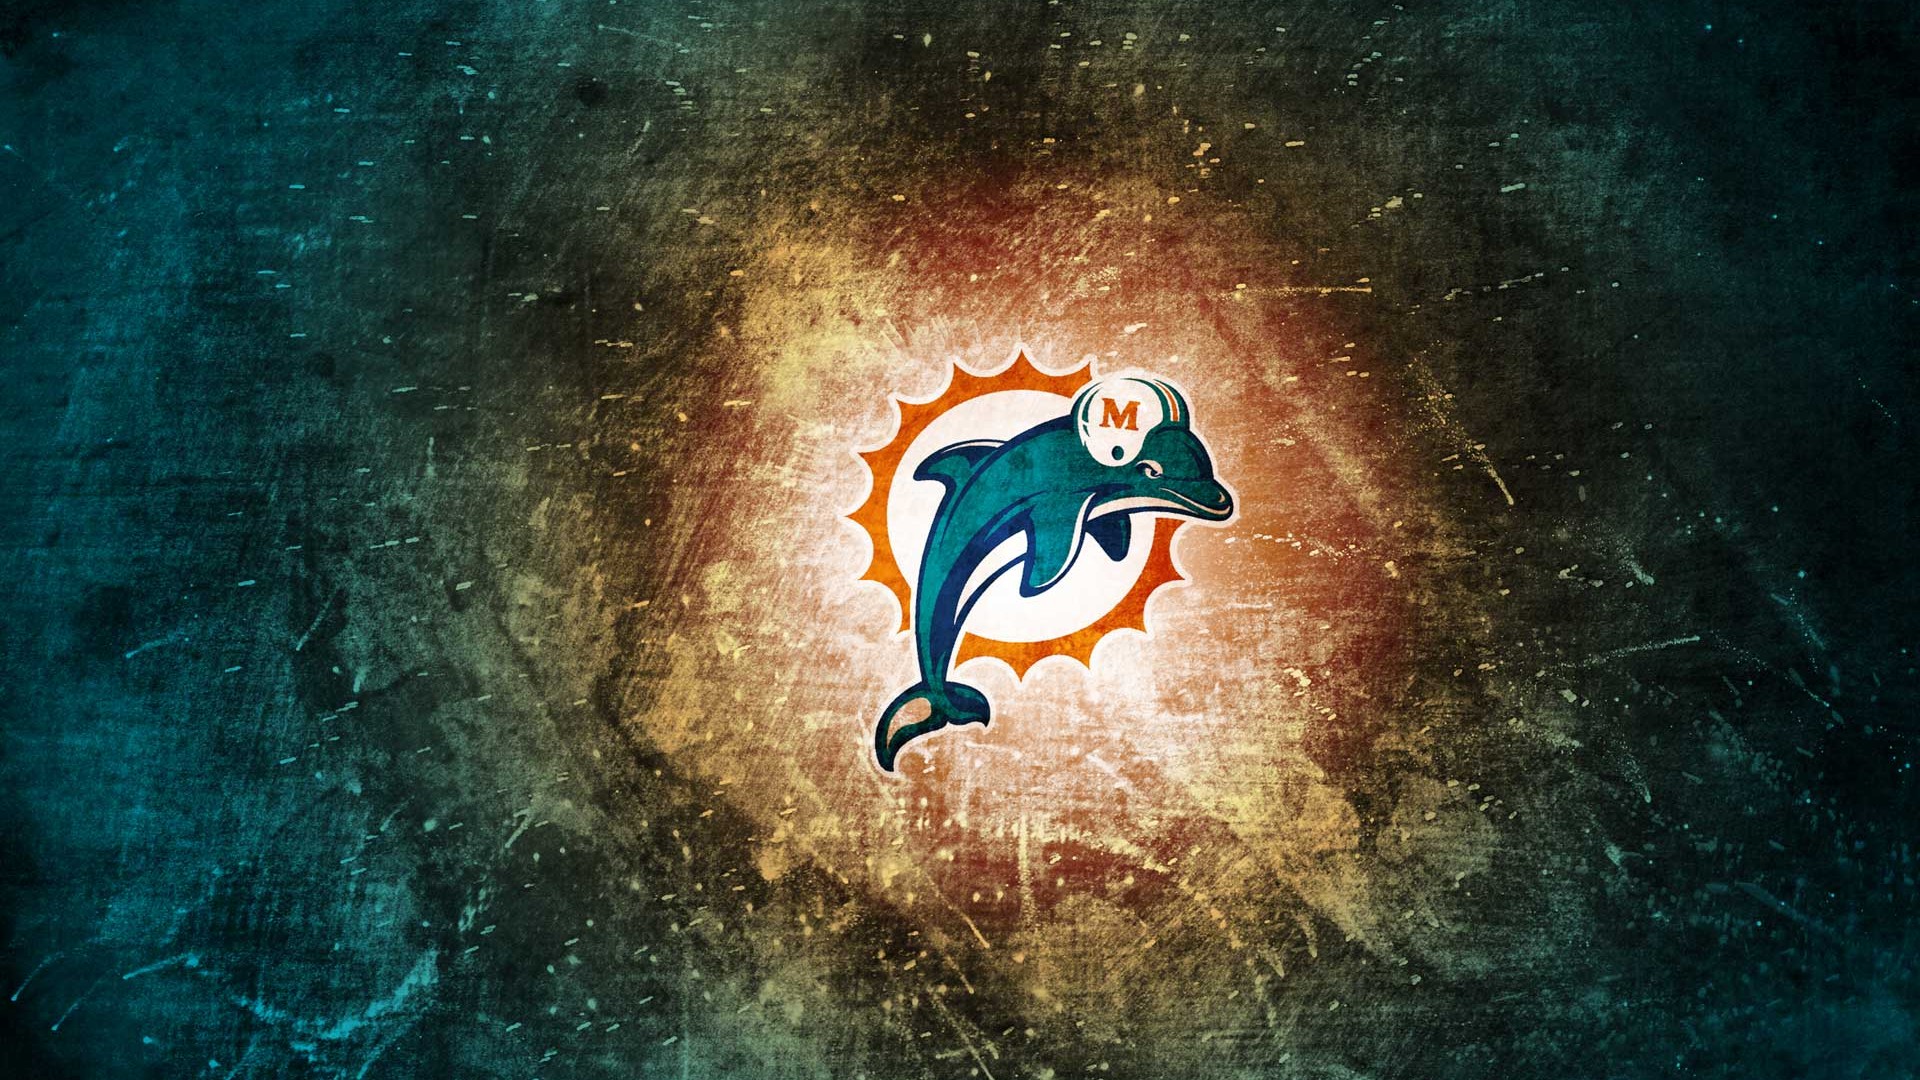 Miami Dolphins For PC Wallpaper With Resolution 1920X1080 pixel. You can make this wallpaper for your Mac or Windows Desktop Background, iPhone, Android or Tablet and another Smartphone device for free